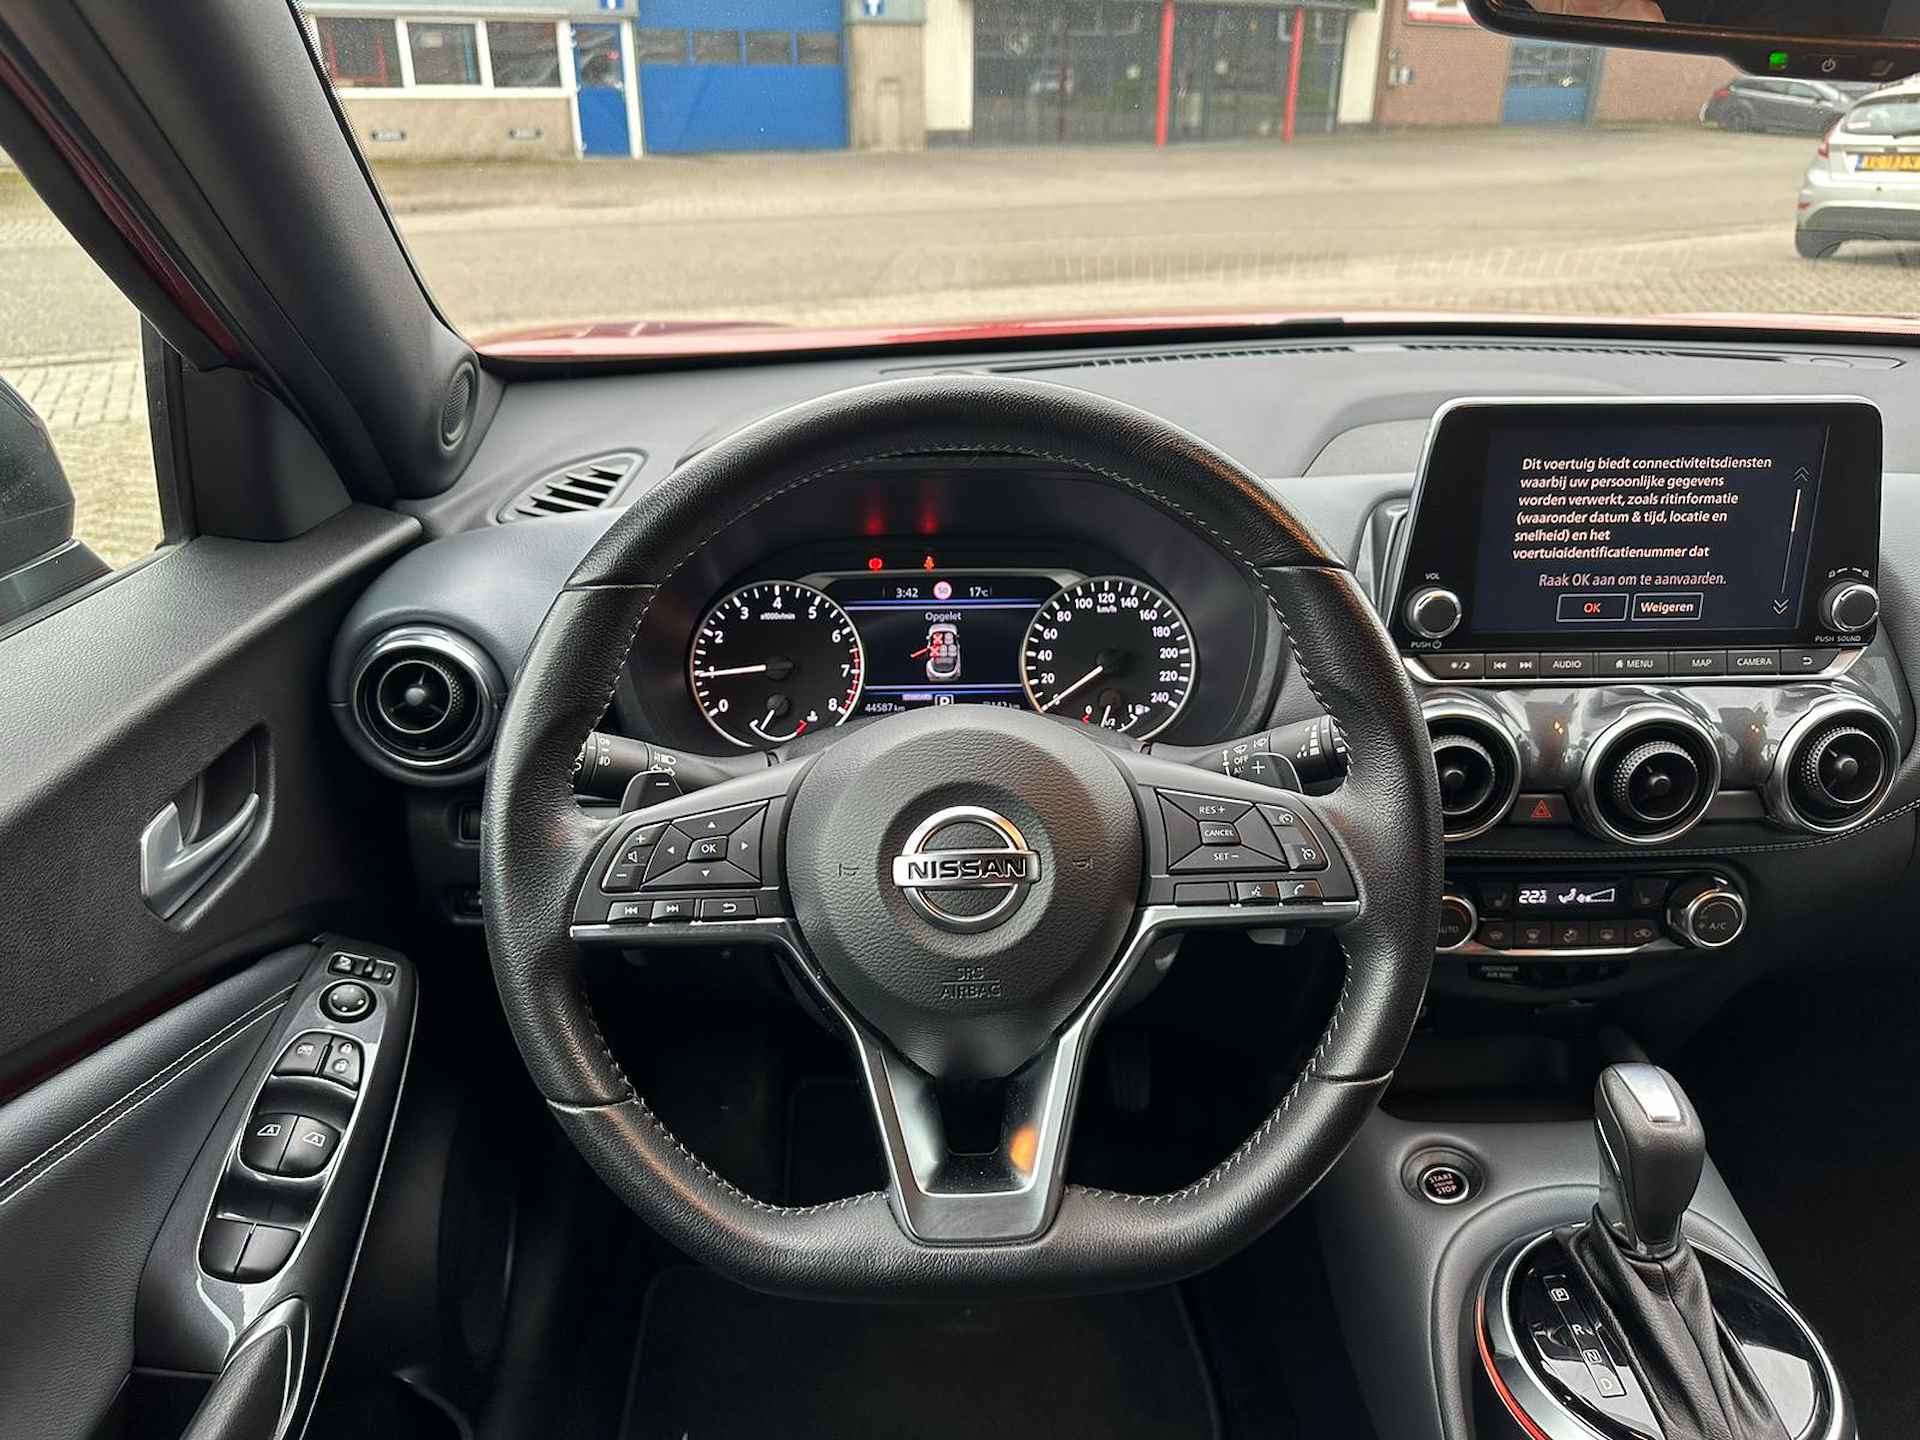 Nissan Juke 1.0 DIG-T Premiere Edition Automaat Apple/Android Carply / Navi / Camera / 19 inch / Cruise Control / Keyless / Start/stop - 18/25